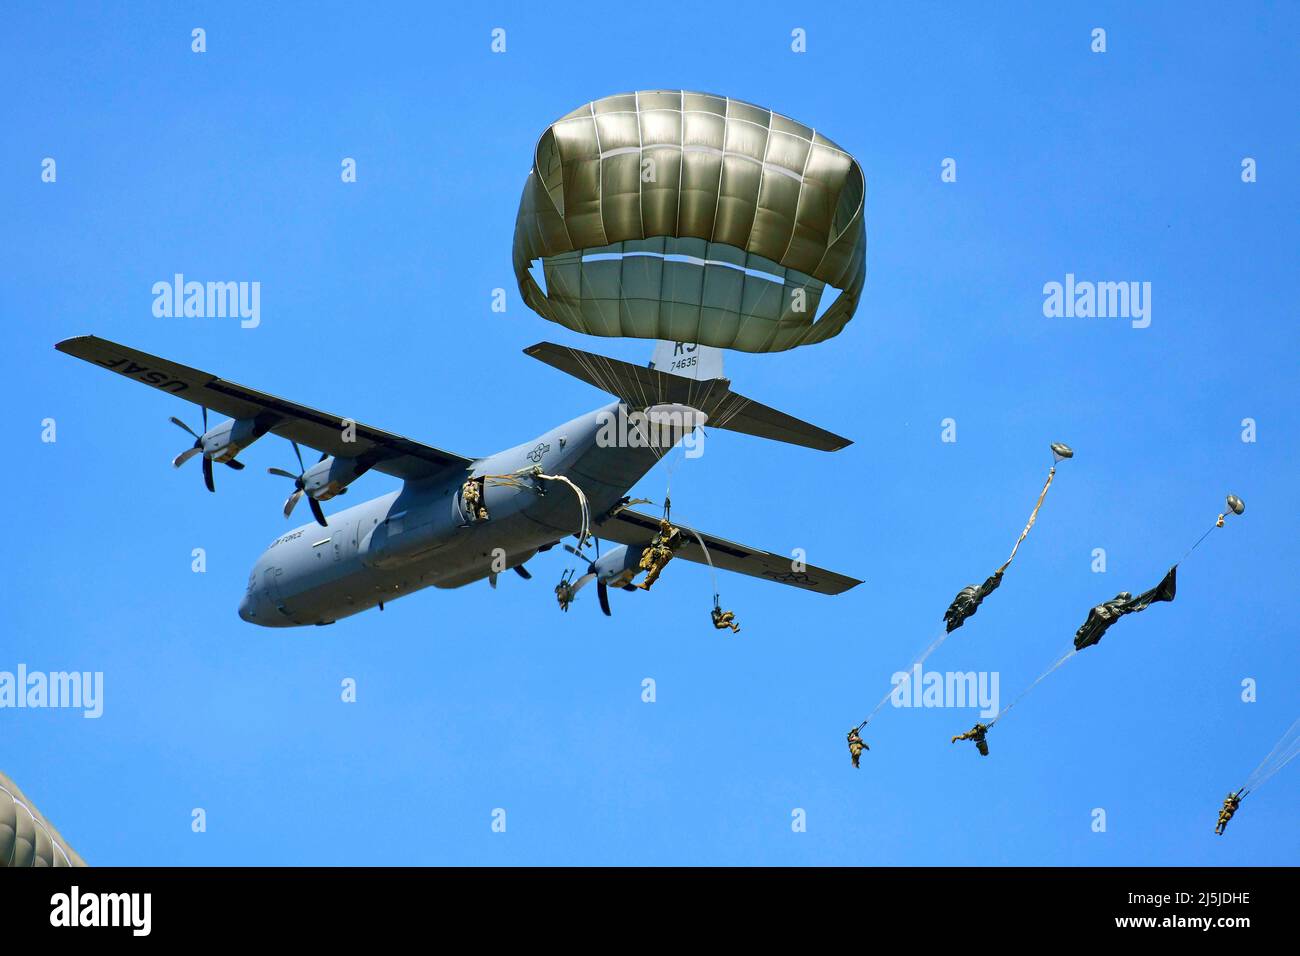 Pordenone, Italy. 12th Apr, 2022. U.S. Army paratroopers assigned to the 54th Brigade Engineer Battalion, 173rd Airborne Brigade, conduct an airborne operation from a U.S. Air Force 86th Air Wing C-130 Hercules aircraft onto Juliet Drop Zone in Pordenone, Italy on April 12, 2022. The 173rd Airborne Brigade is the U.S. Army Contingency Response Force in Europe, capable of projecting ready forces anywhere in the U.S. European, Africa or Central Commands' areas of responsibility. Credit: U.S. Army/ZUMA Press Wire Service/ZUMAPRESS.com/Alamy Live News Stock Photo